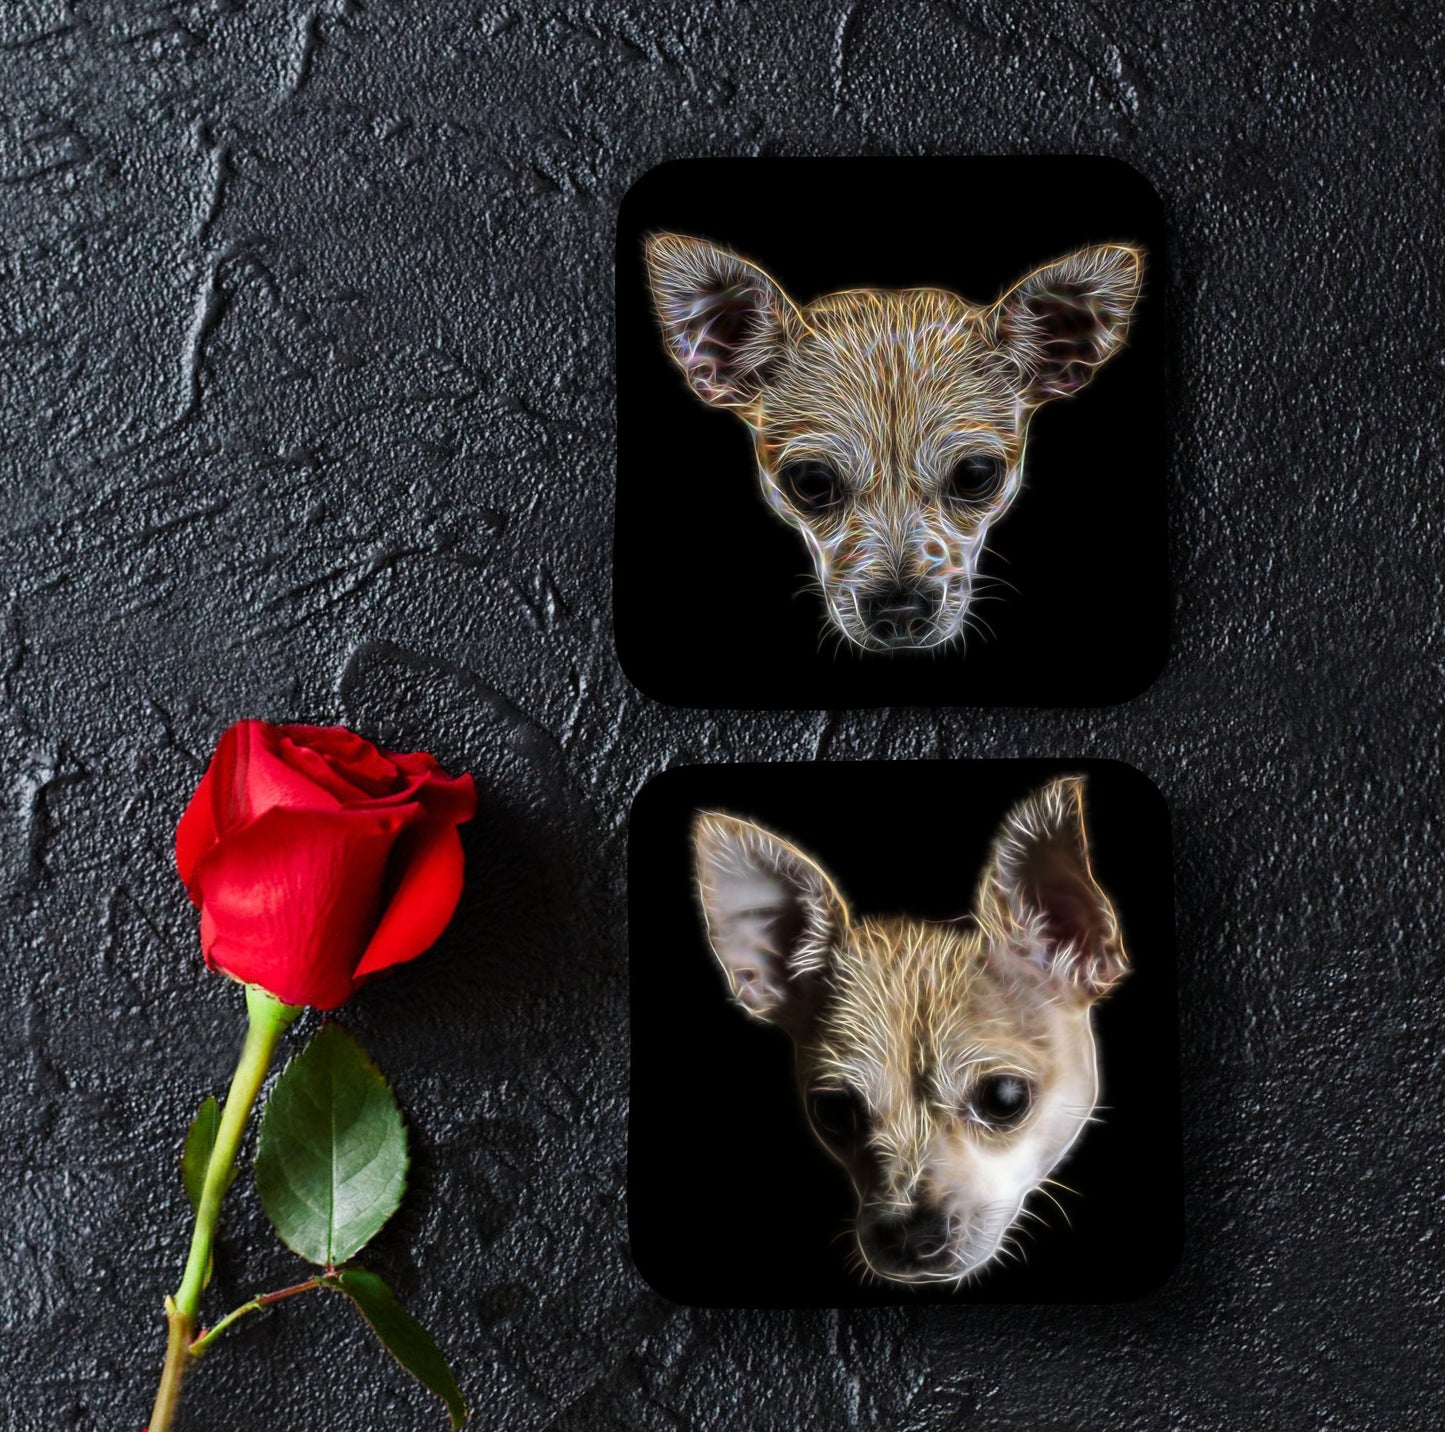 Cream Chihuahua Coasters, Set of 2, with Fractal Art Design.